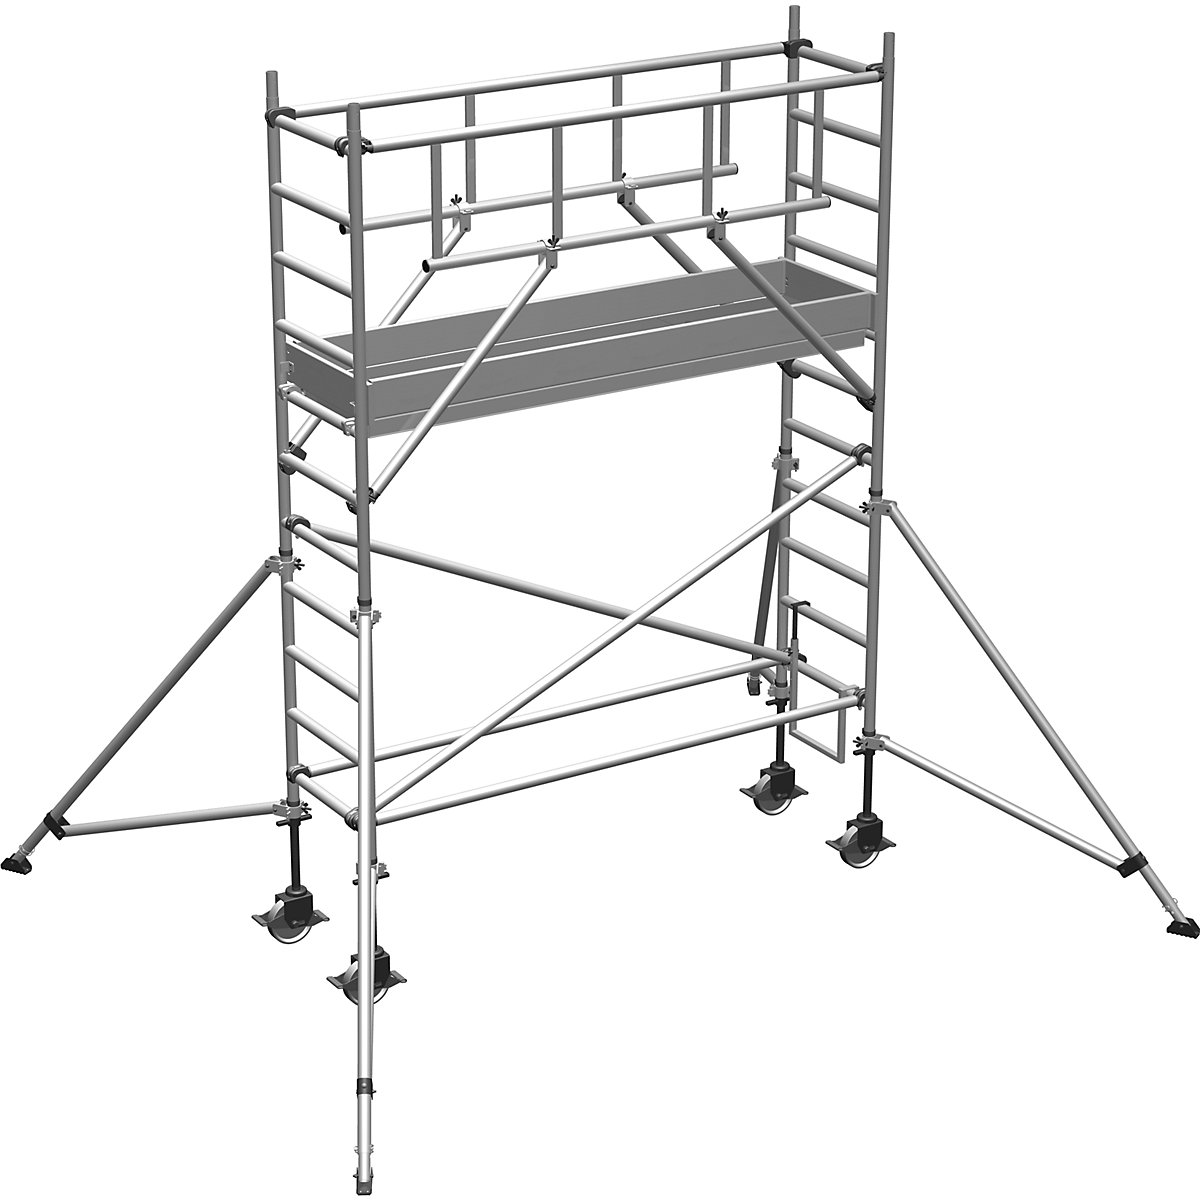 S-PLUS mobile access tower – ZARGES, platform 1.80 x 0.60 m, working height 4.50 m-7